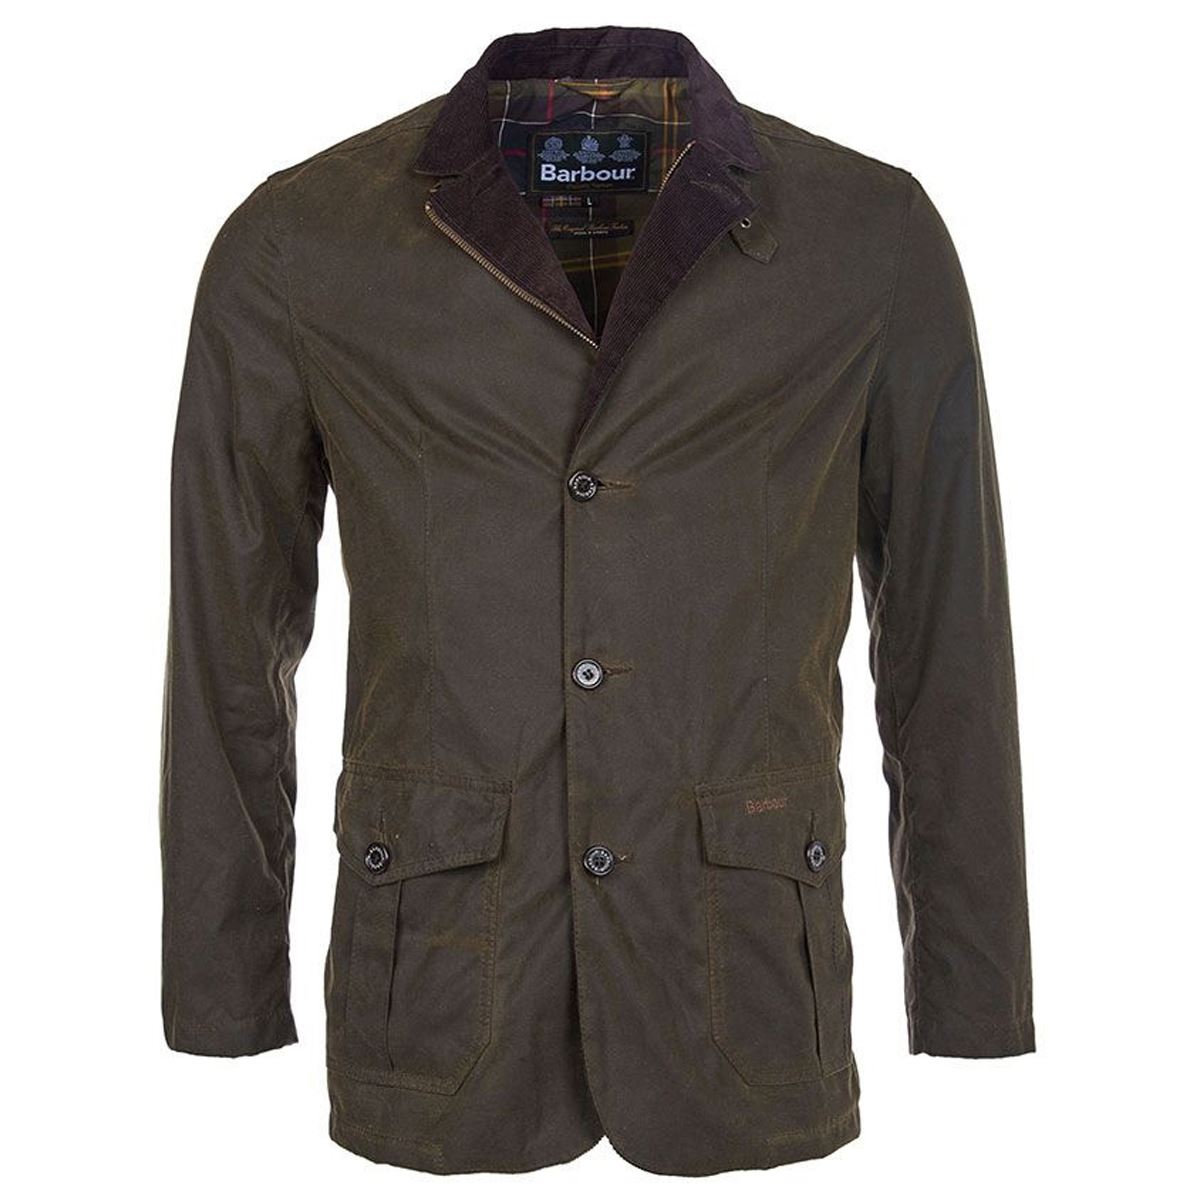 What are the specs of the Barbour Lutz Wax Jacket?